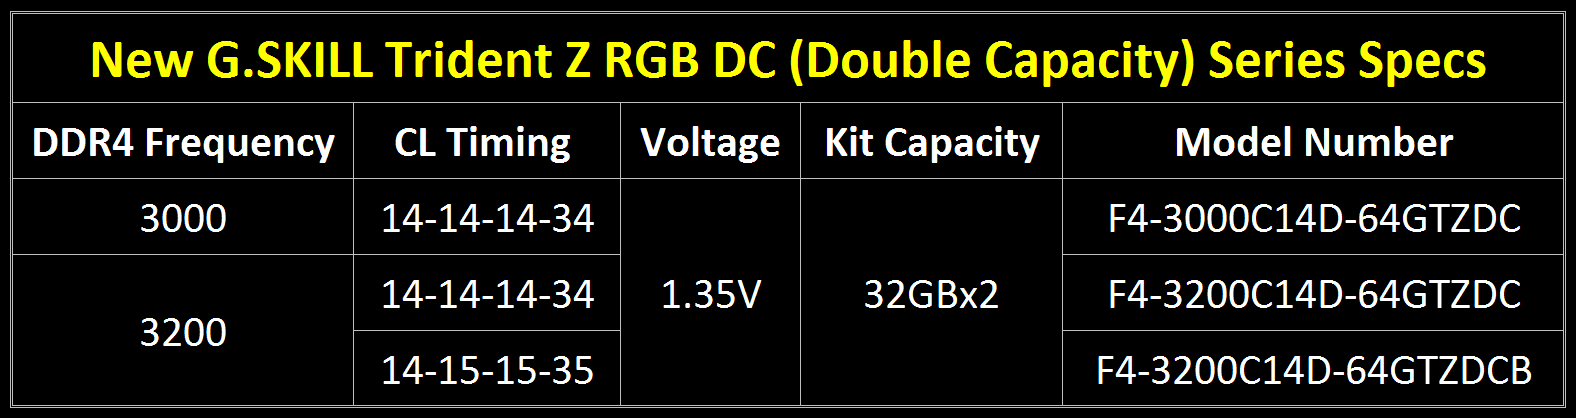 G.Skill Double Capacity DDR4 TridentZ RGB Specifications